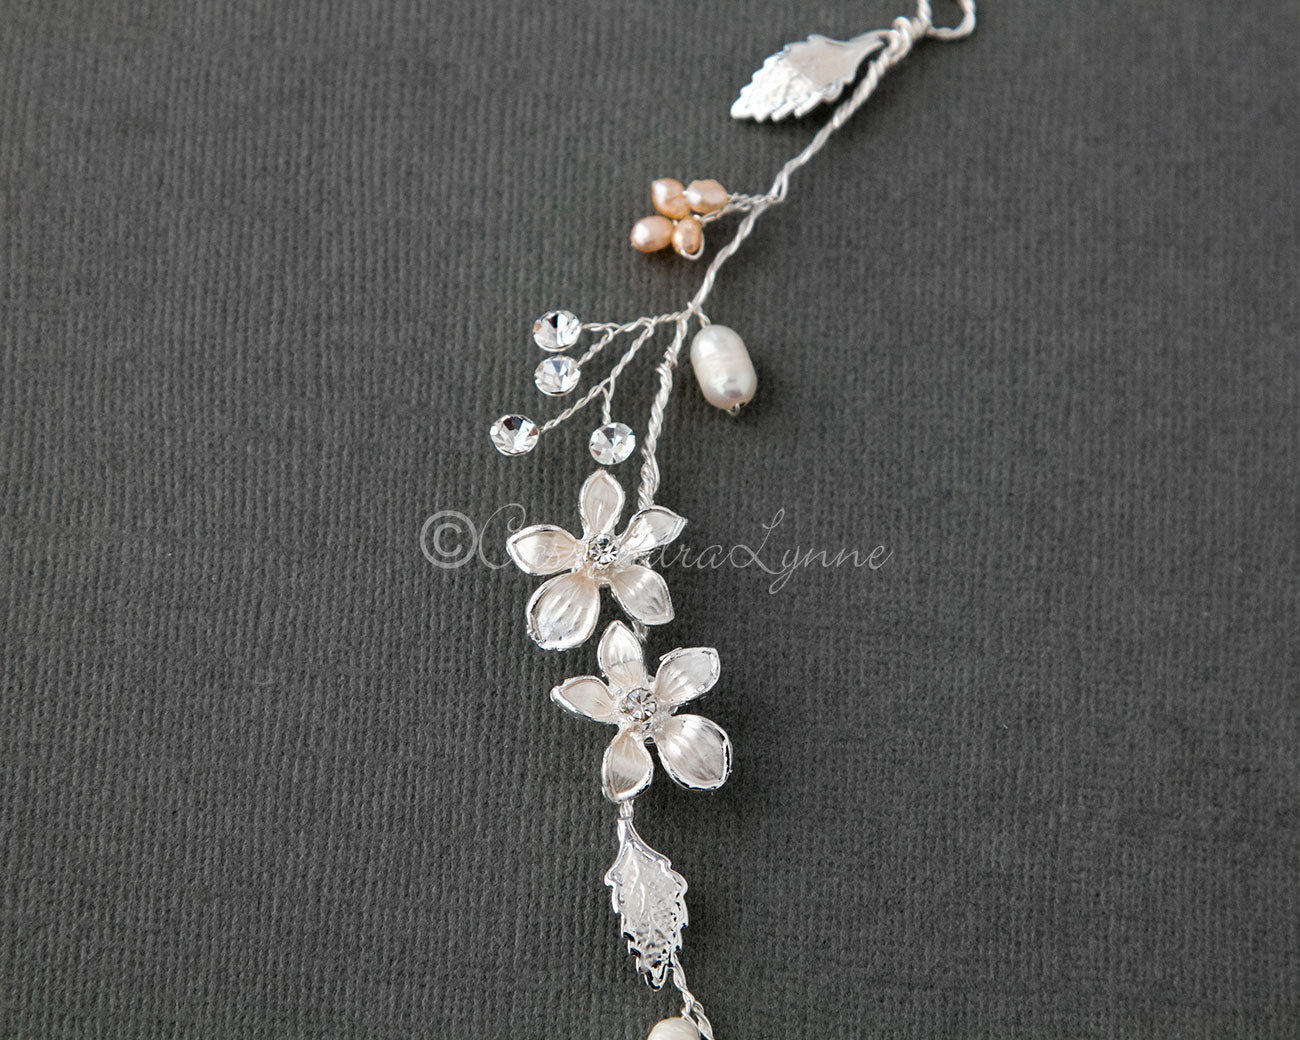 Boho bridal hair vine with mother of pearl flowers - Sienna